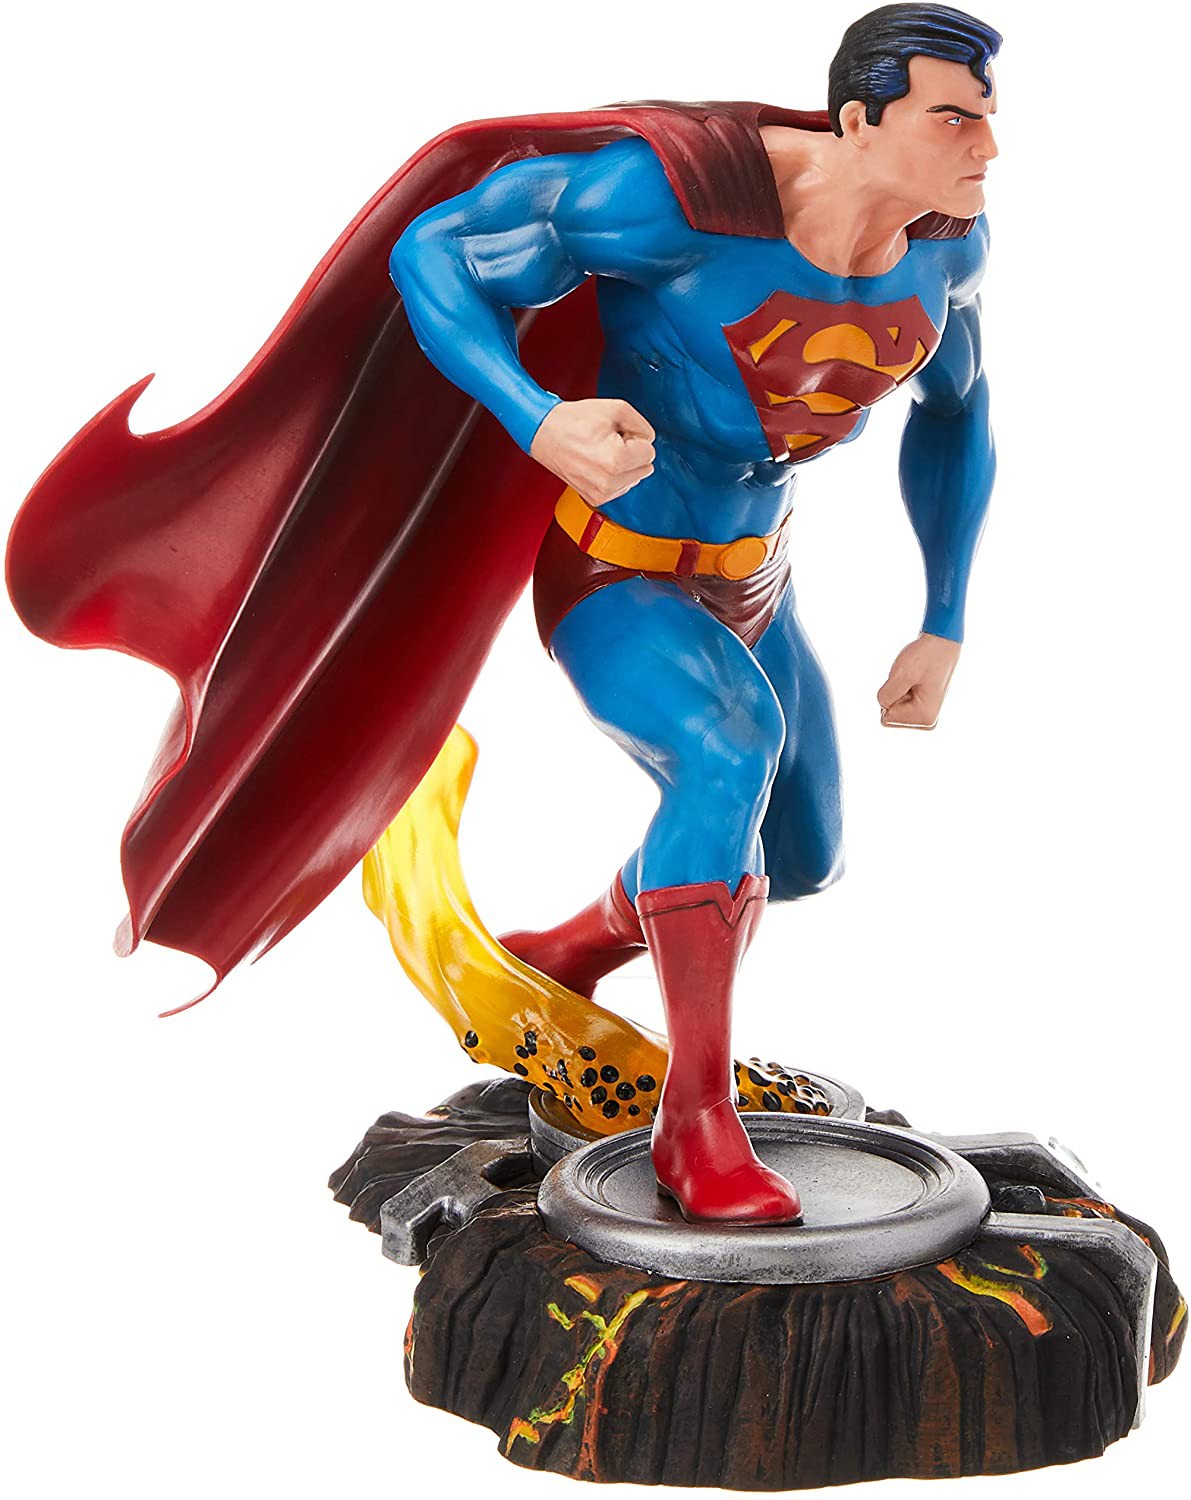 Superman Comic Book Statue Will Make You Believe in Heroes